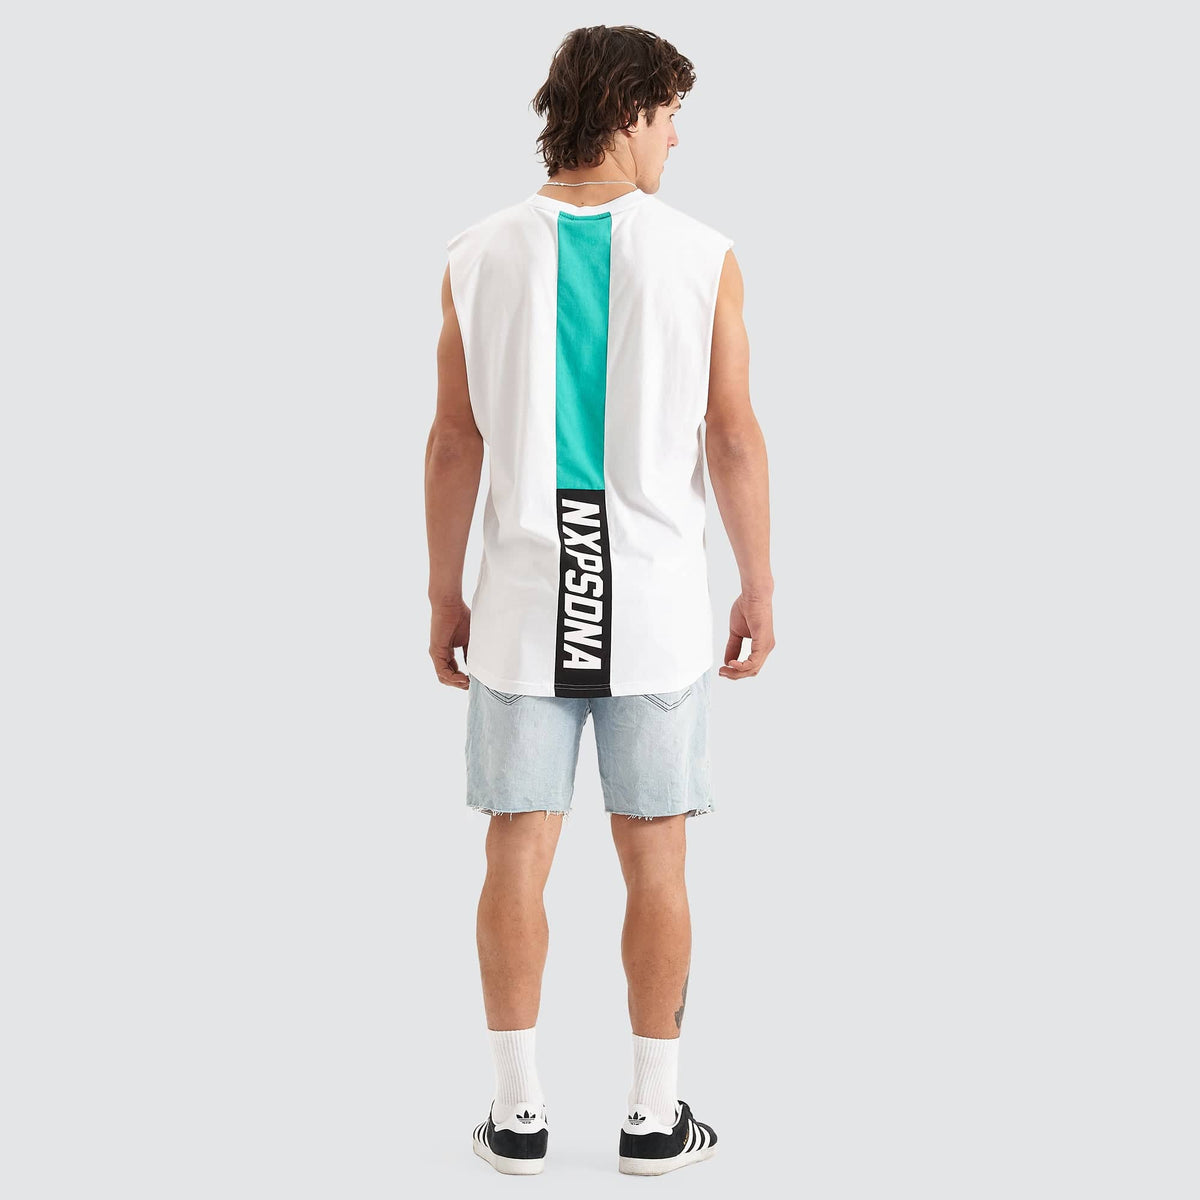 Cautionary Scoop Back Muscle White